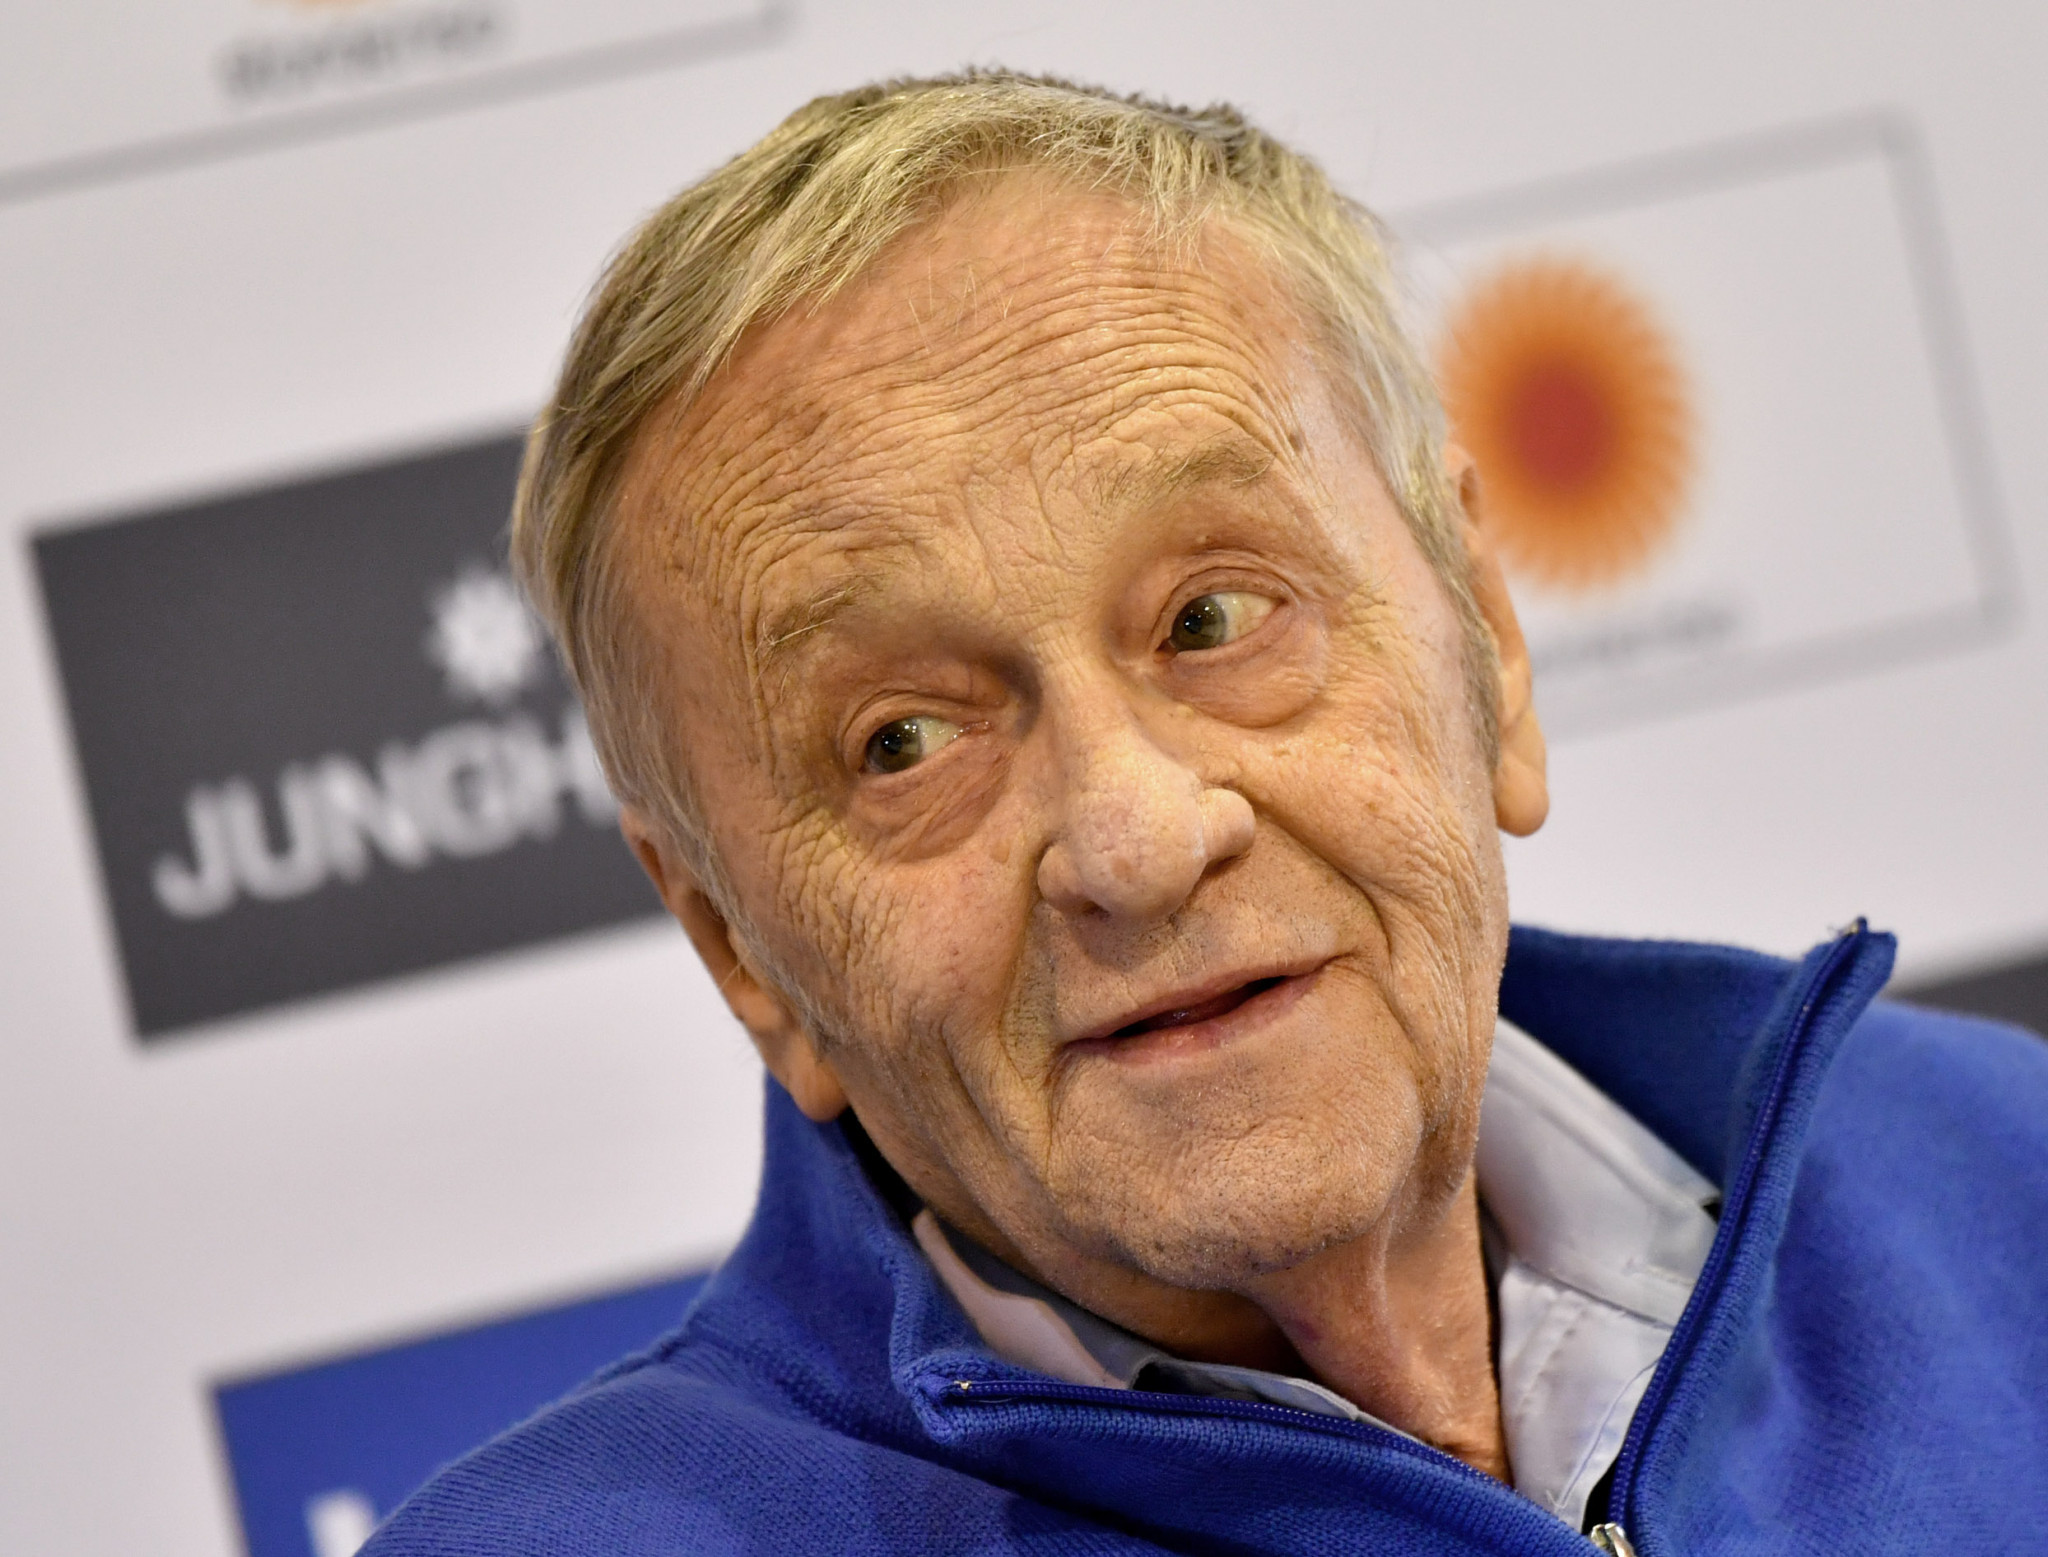 Former President of the International Ski Federation Gian-Franco Kasper has died at the age of 77, a month after standing down following 23 years at the helm of the organisation ©Getty Images